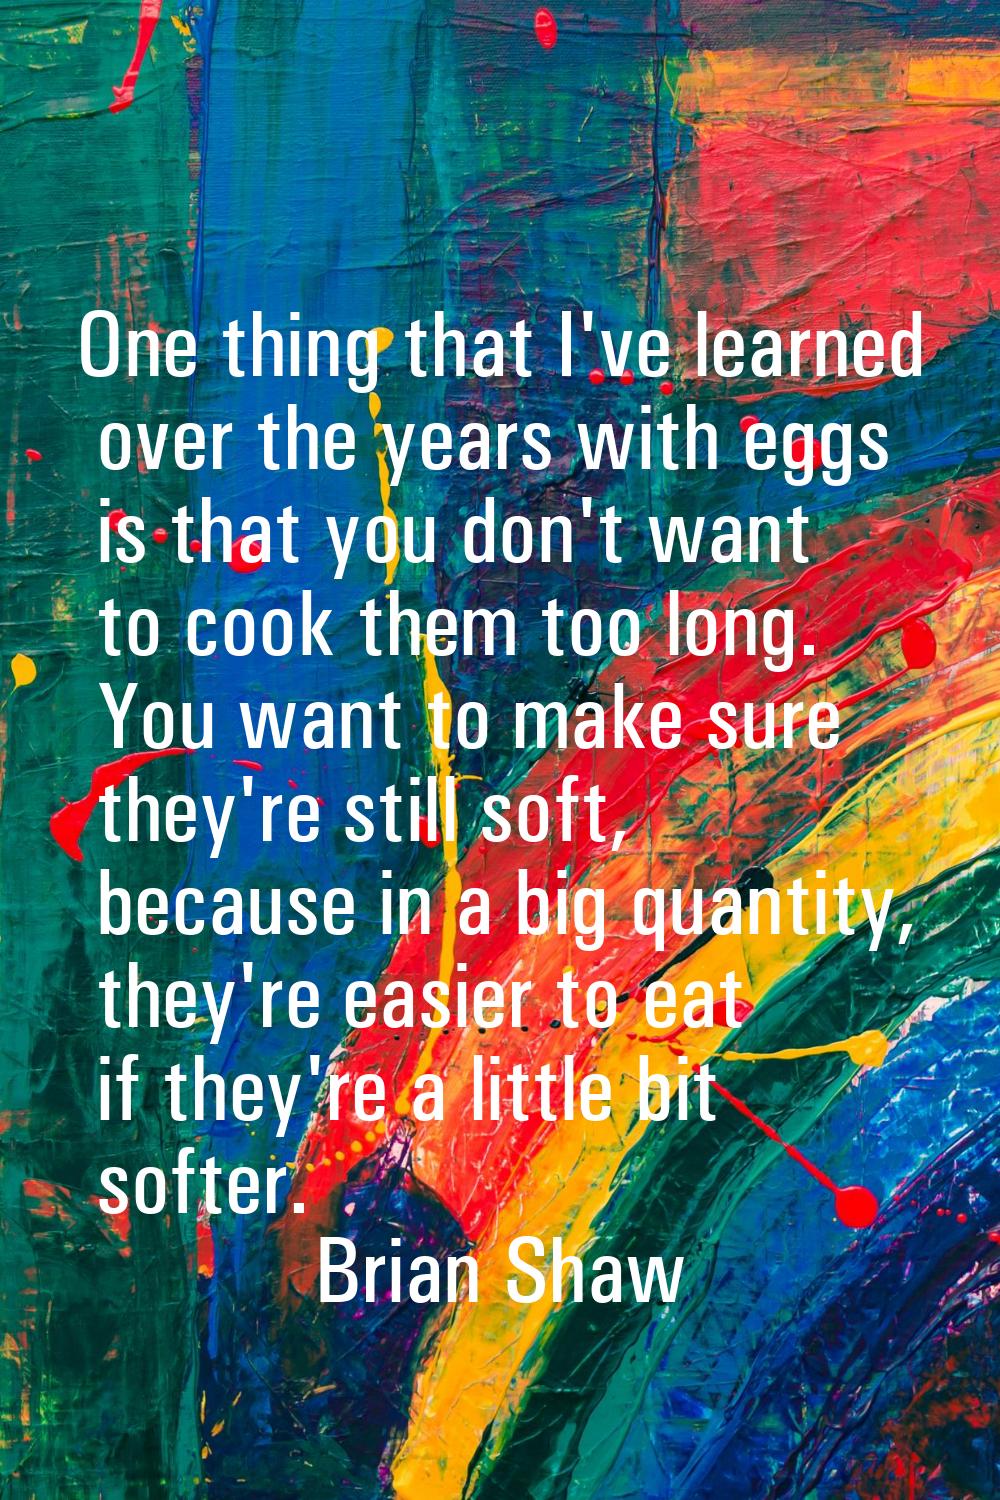 One thing that I've learned over the years with eggs is that you don't want to cook them too long. 